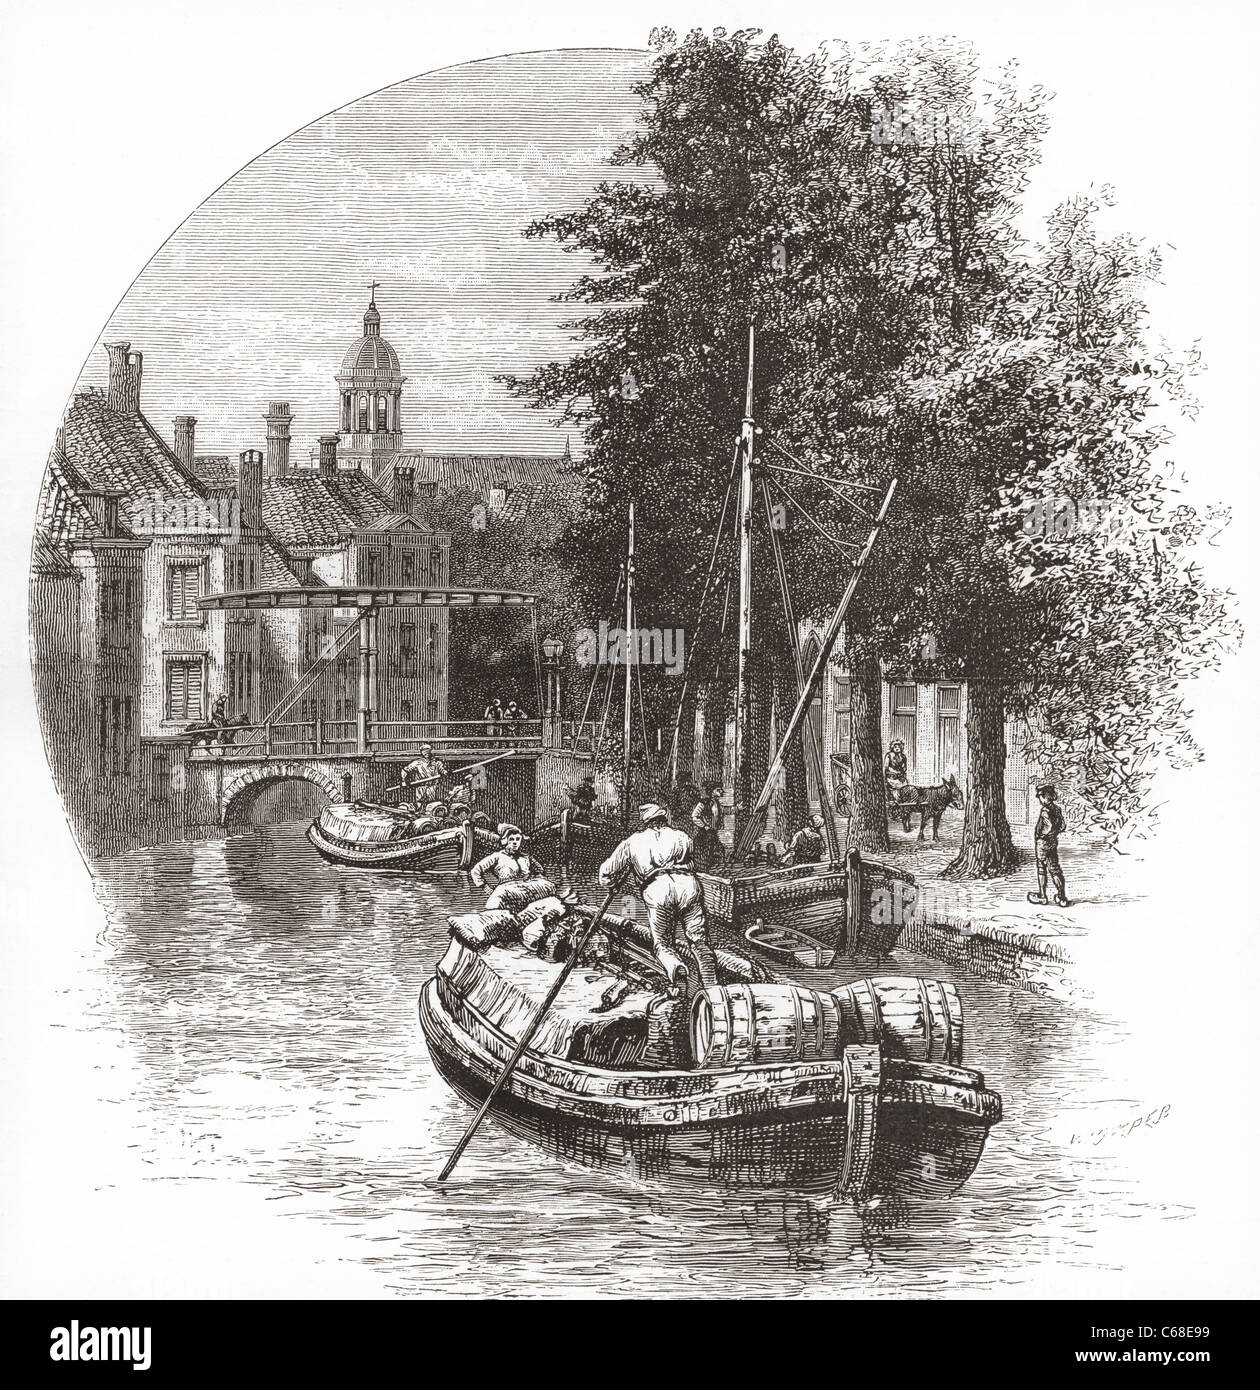 Leiden, South Holland, the Netherlands in the 19th century. Stock Photo